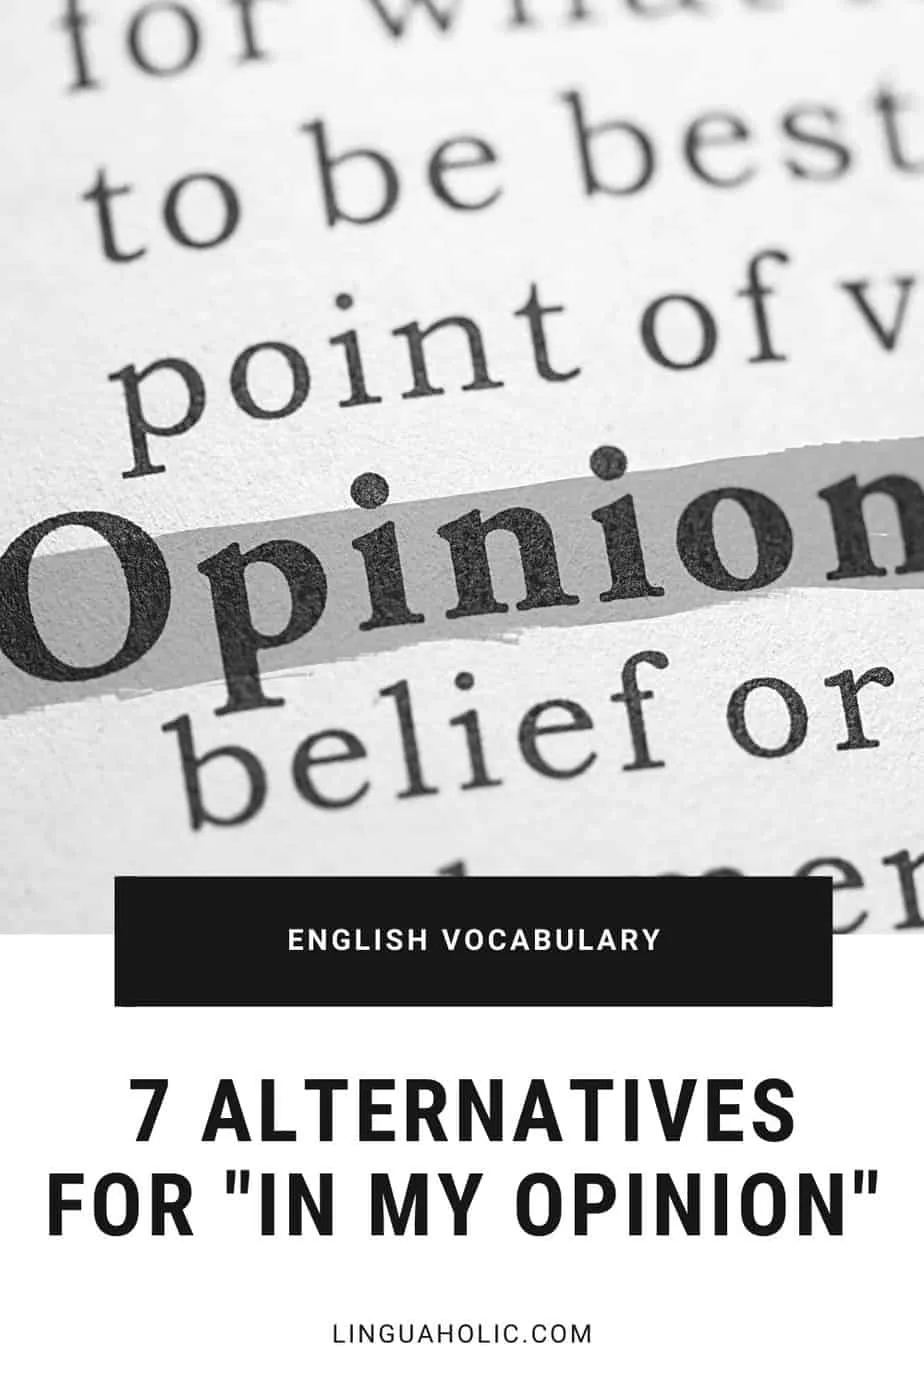 7 Alternatives for "in my opinion"